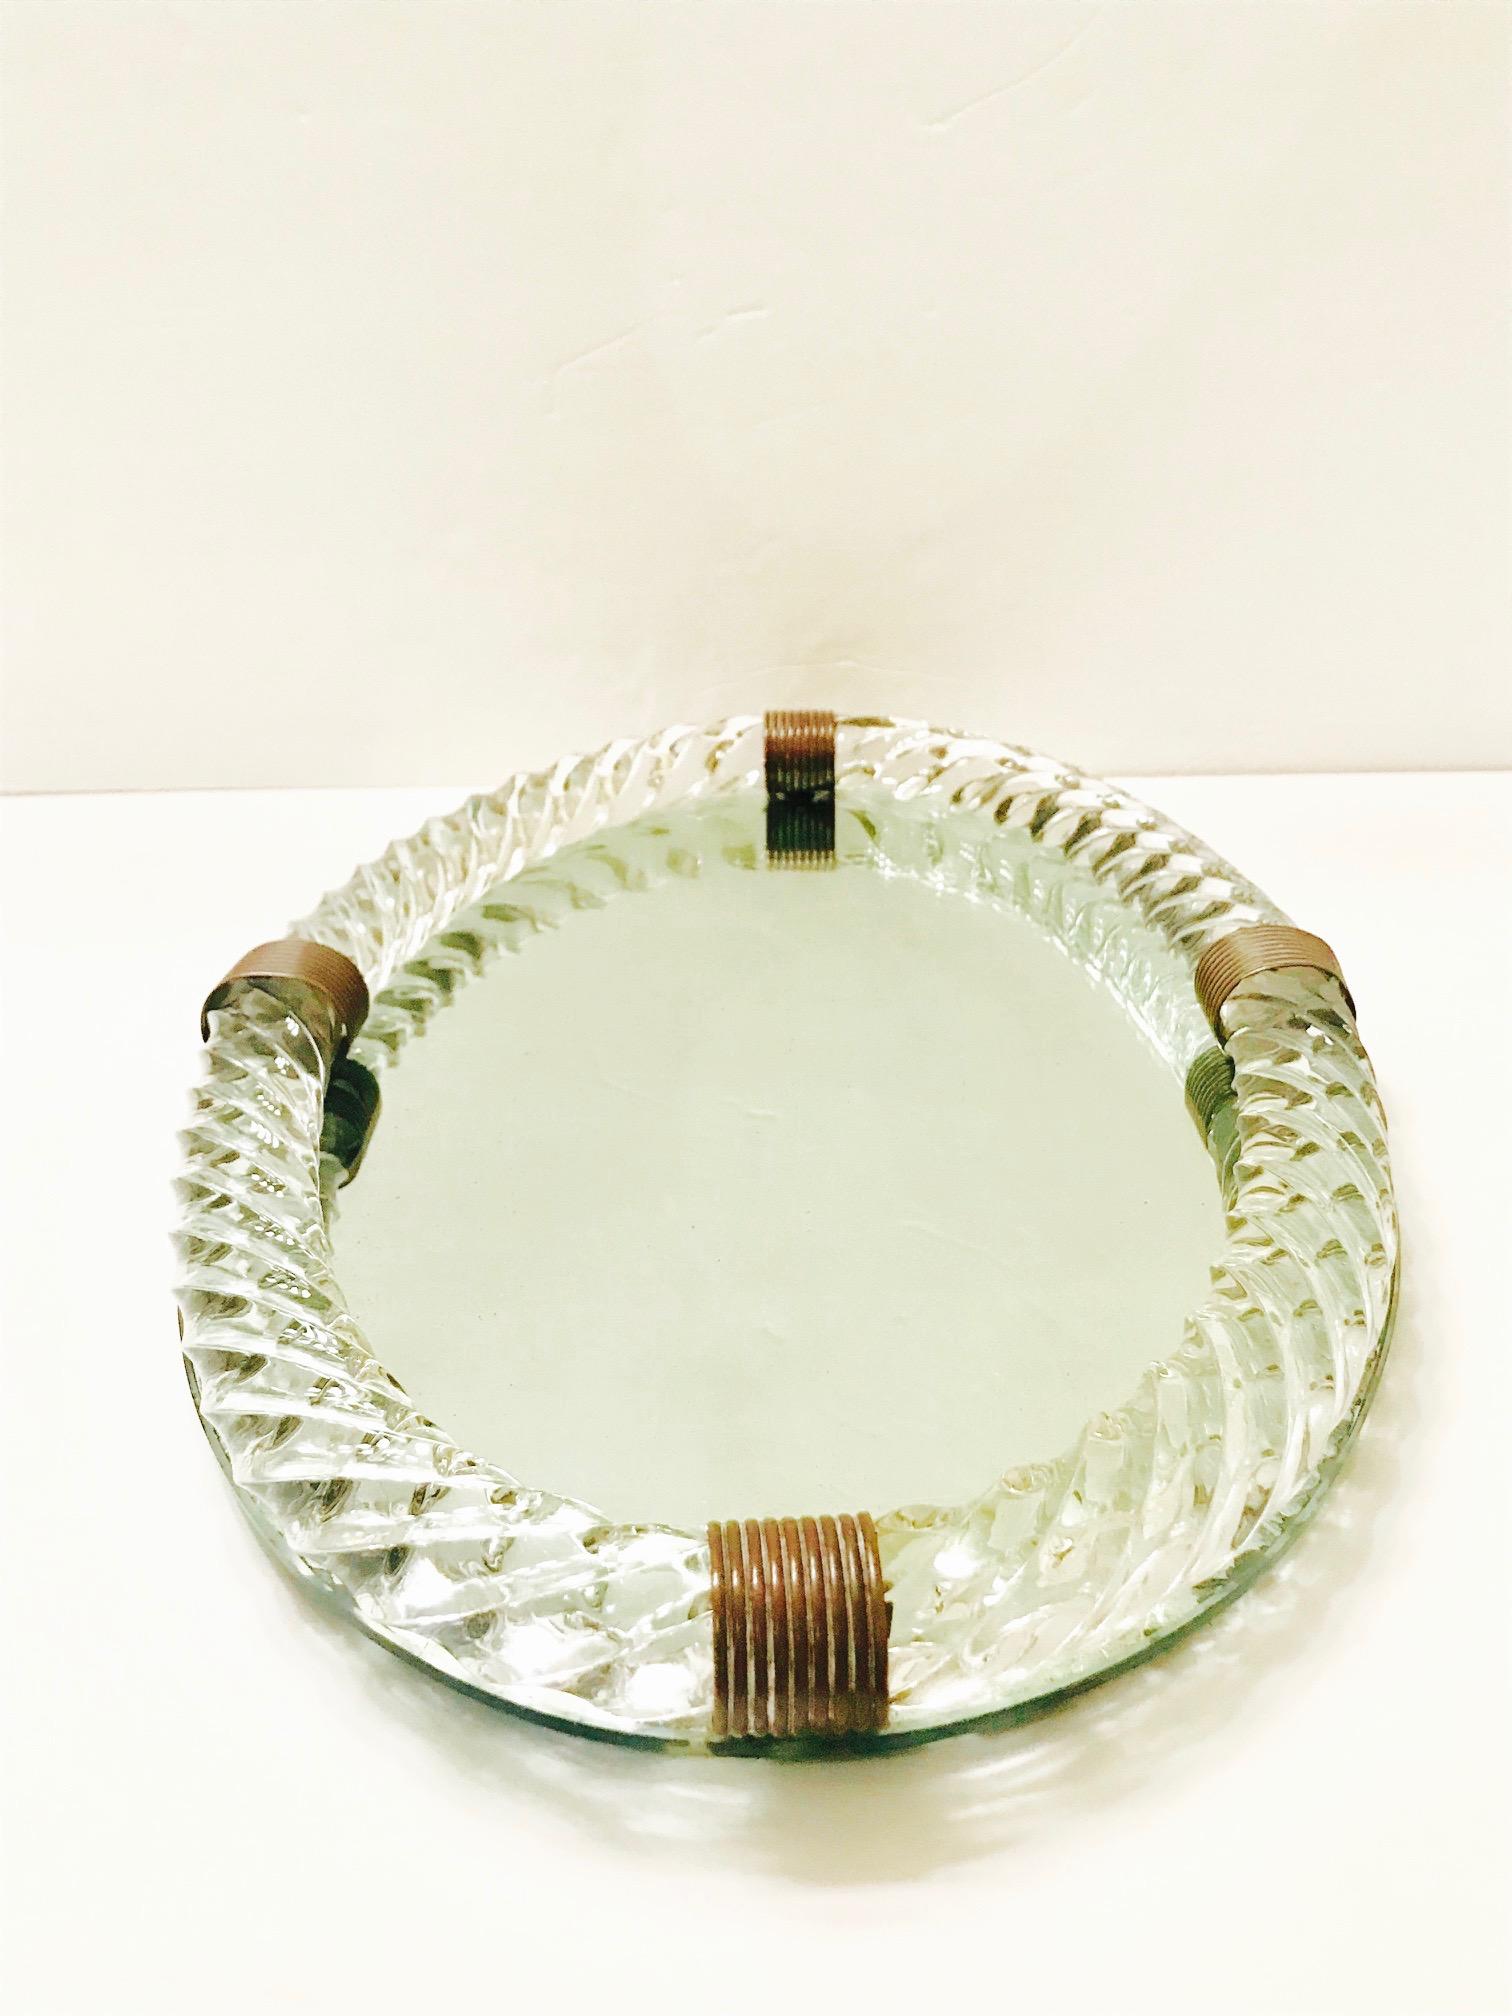 1940s Mirrored Vanity Tray with Murano Glass Rope Gallery by Venini 1